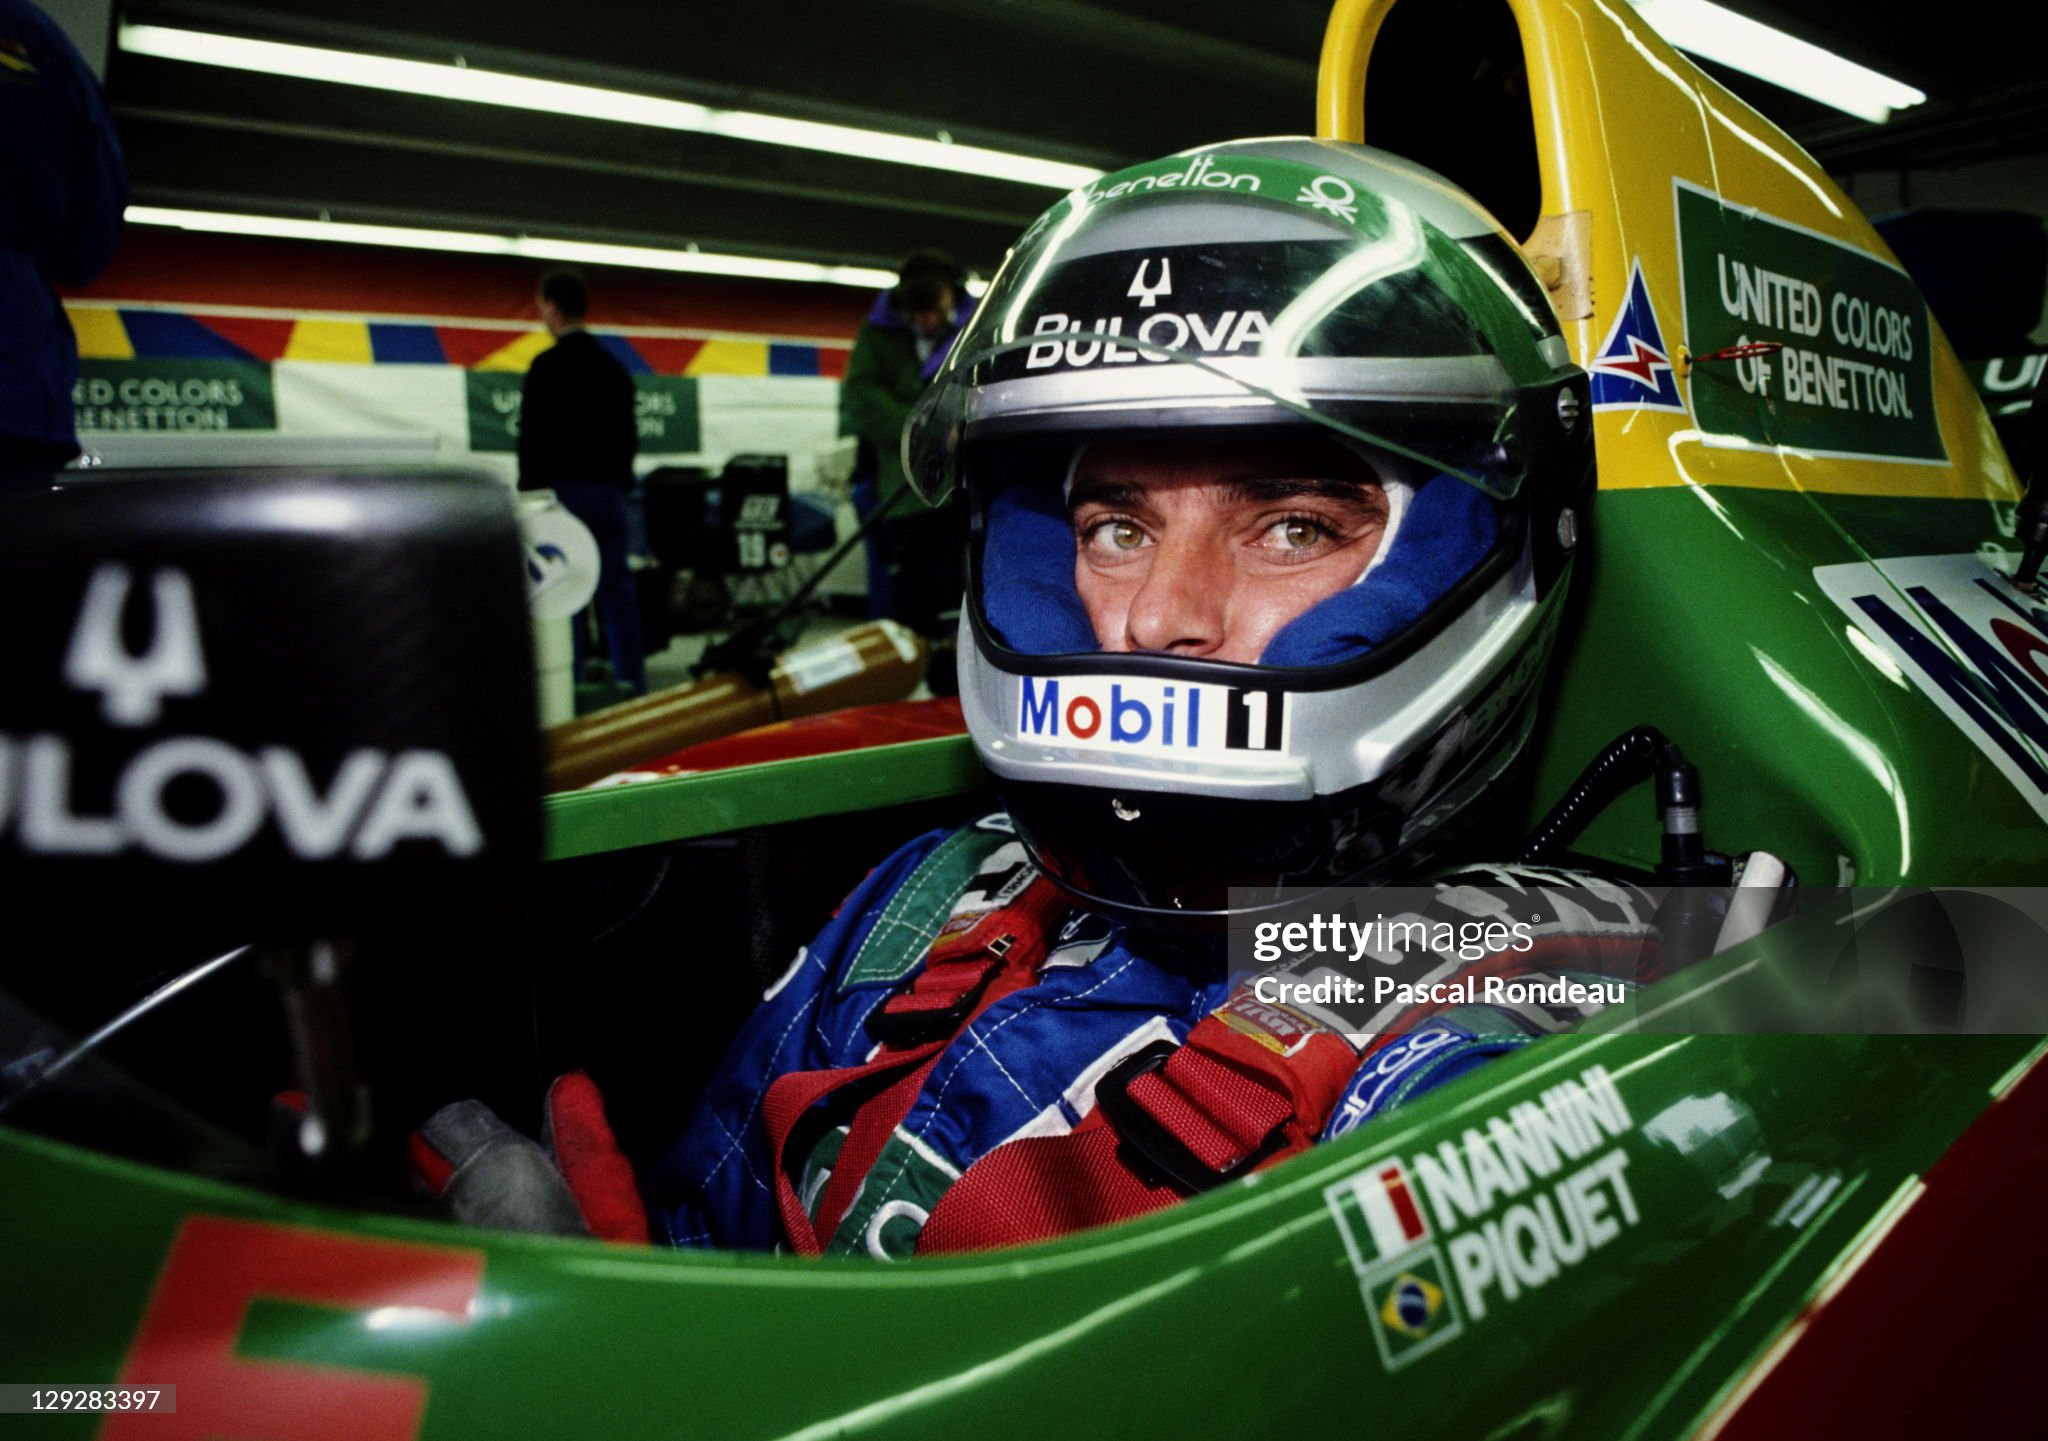 Alessandro Nannini sits aboard Benetton B190 Ford HB 3.5 V8 during practice for the Canadian Grand Prix on 9th June 1990 at the Montreal Circuit Gilles Villeneuve on the Île Notre-Dame in Montreal, Canada. 